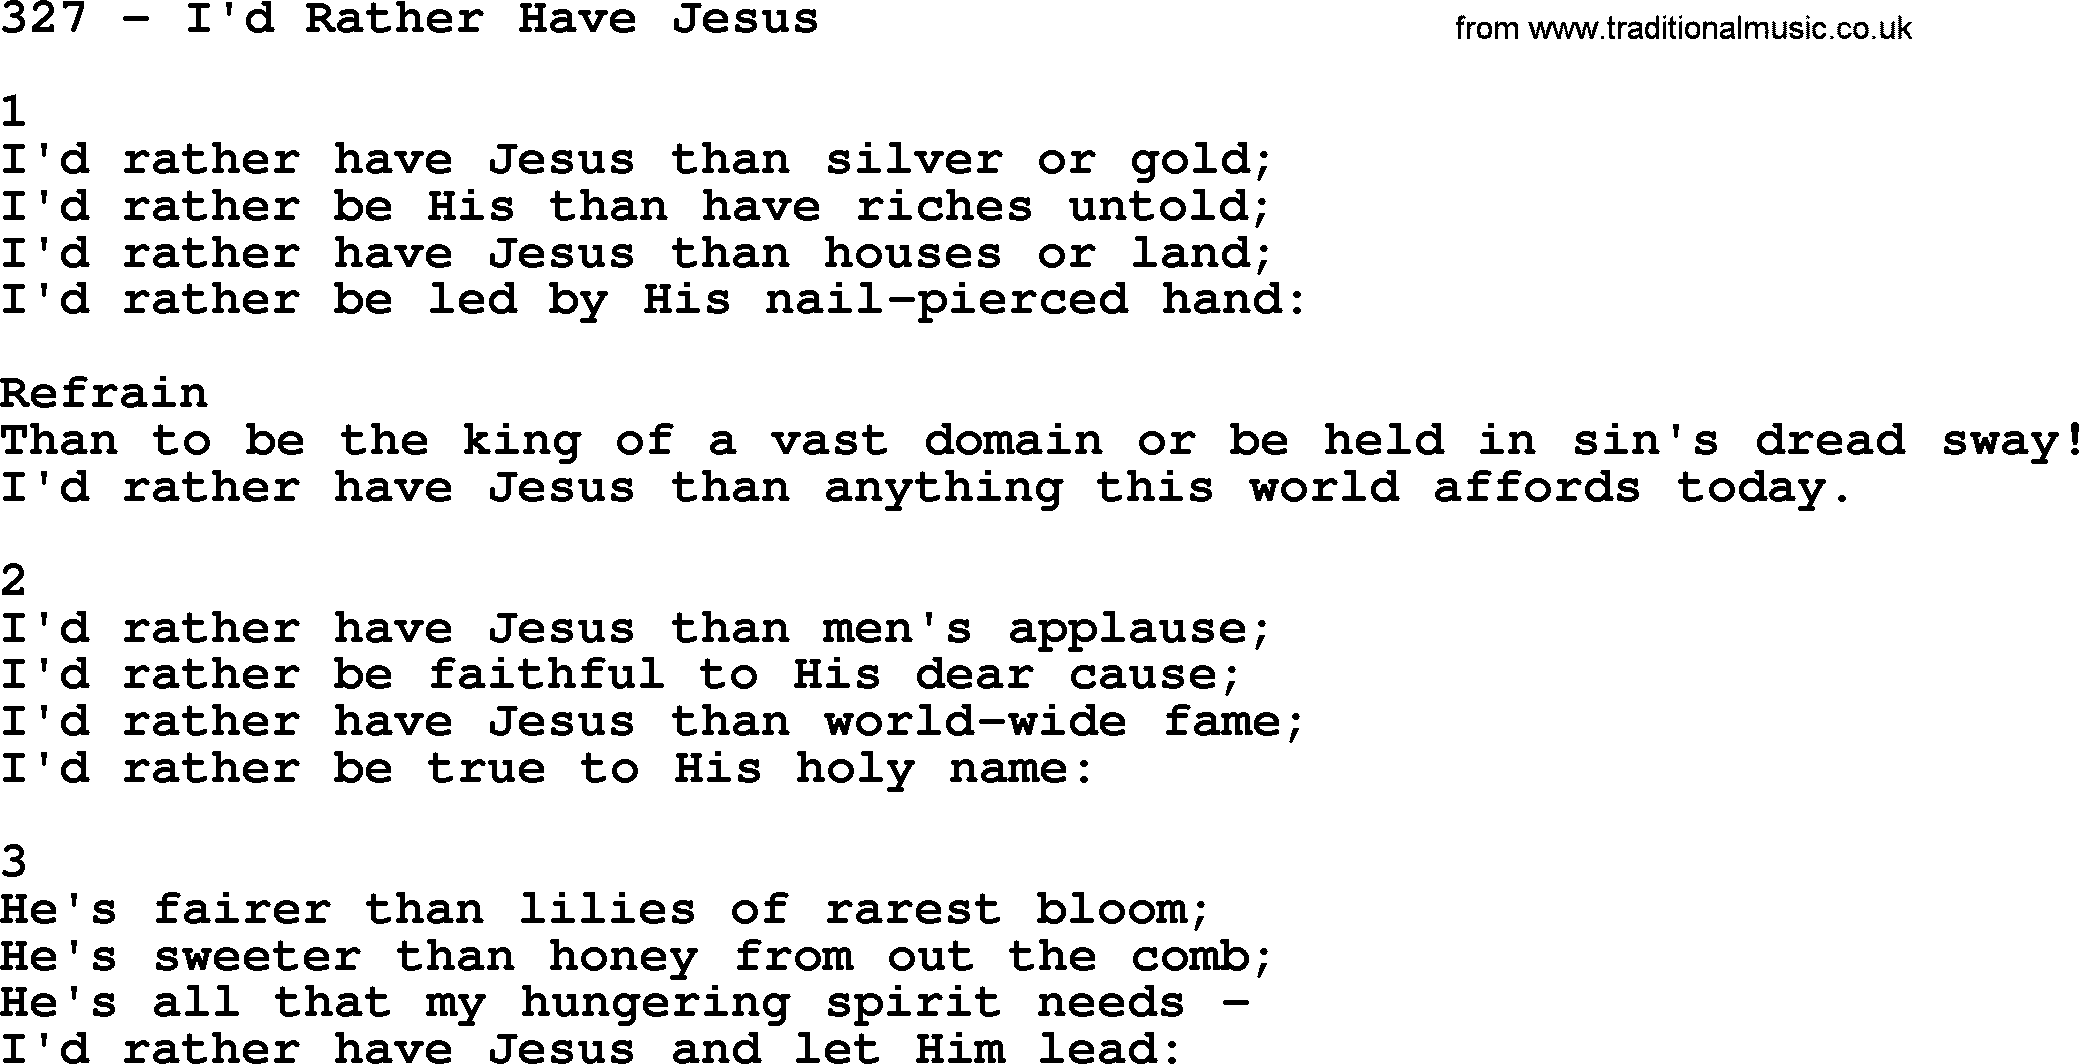 adventist-hymnal-song-327-i-d-rather-have-jesus-with-lyrics-ppt